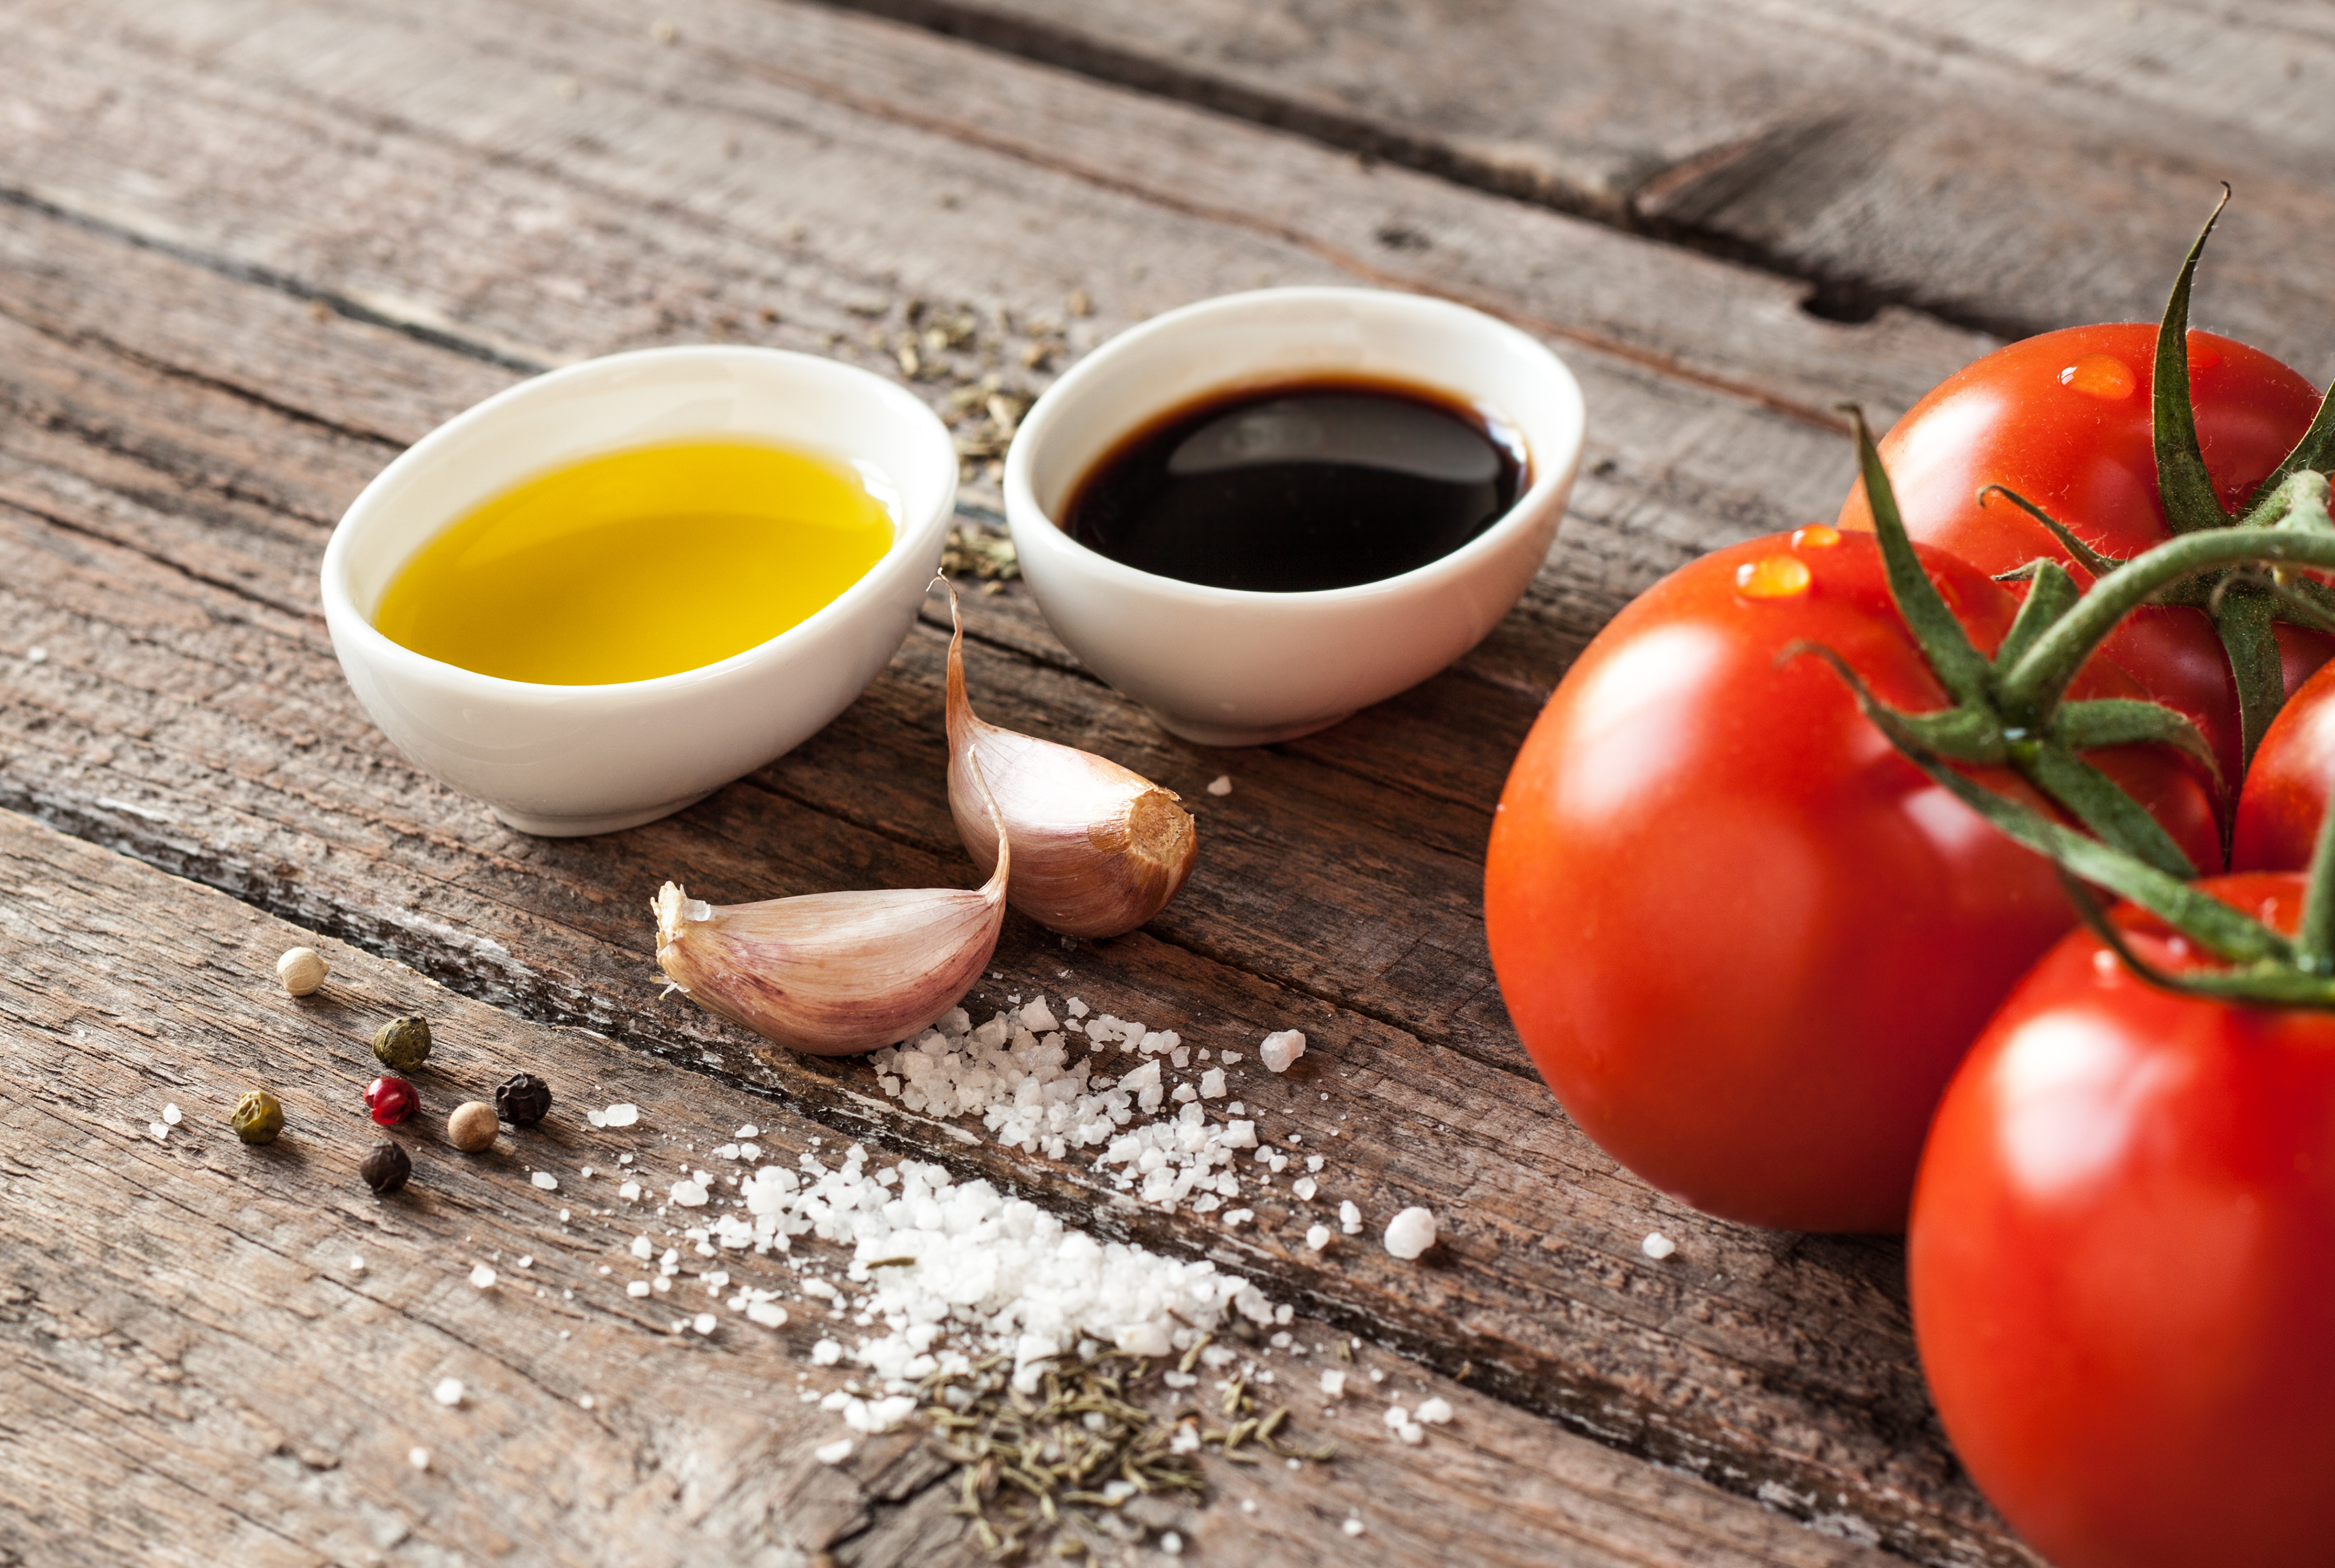 Two small white bowls, one containing oil and the other vinegar, next to a bunch of tomatoes, two garlic cloves, and seasonings on a wooden surface.